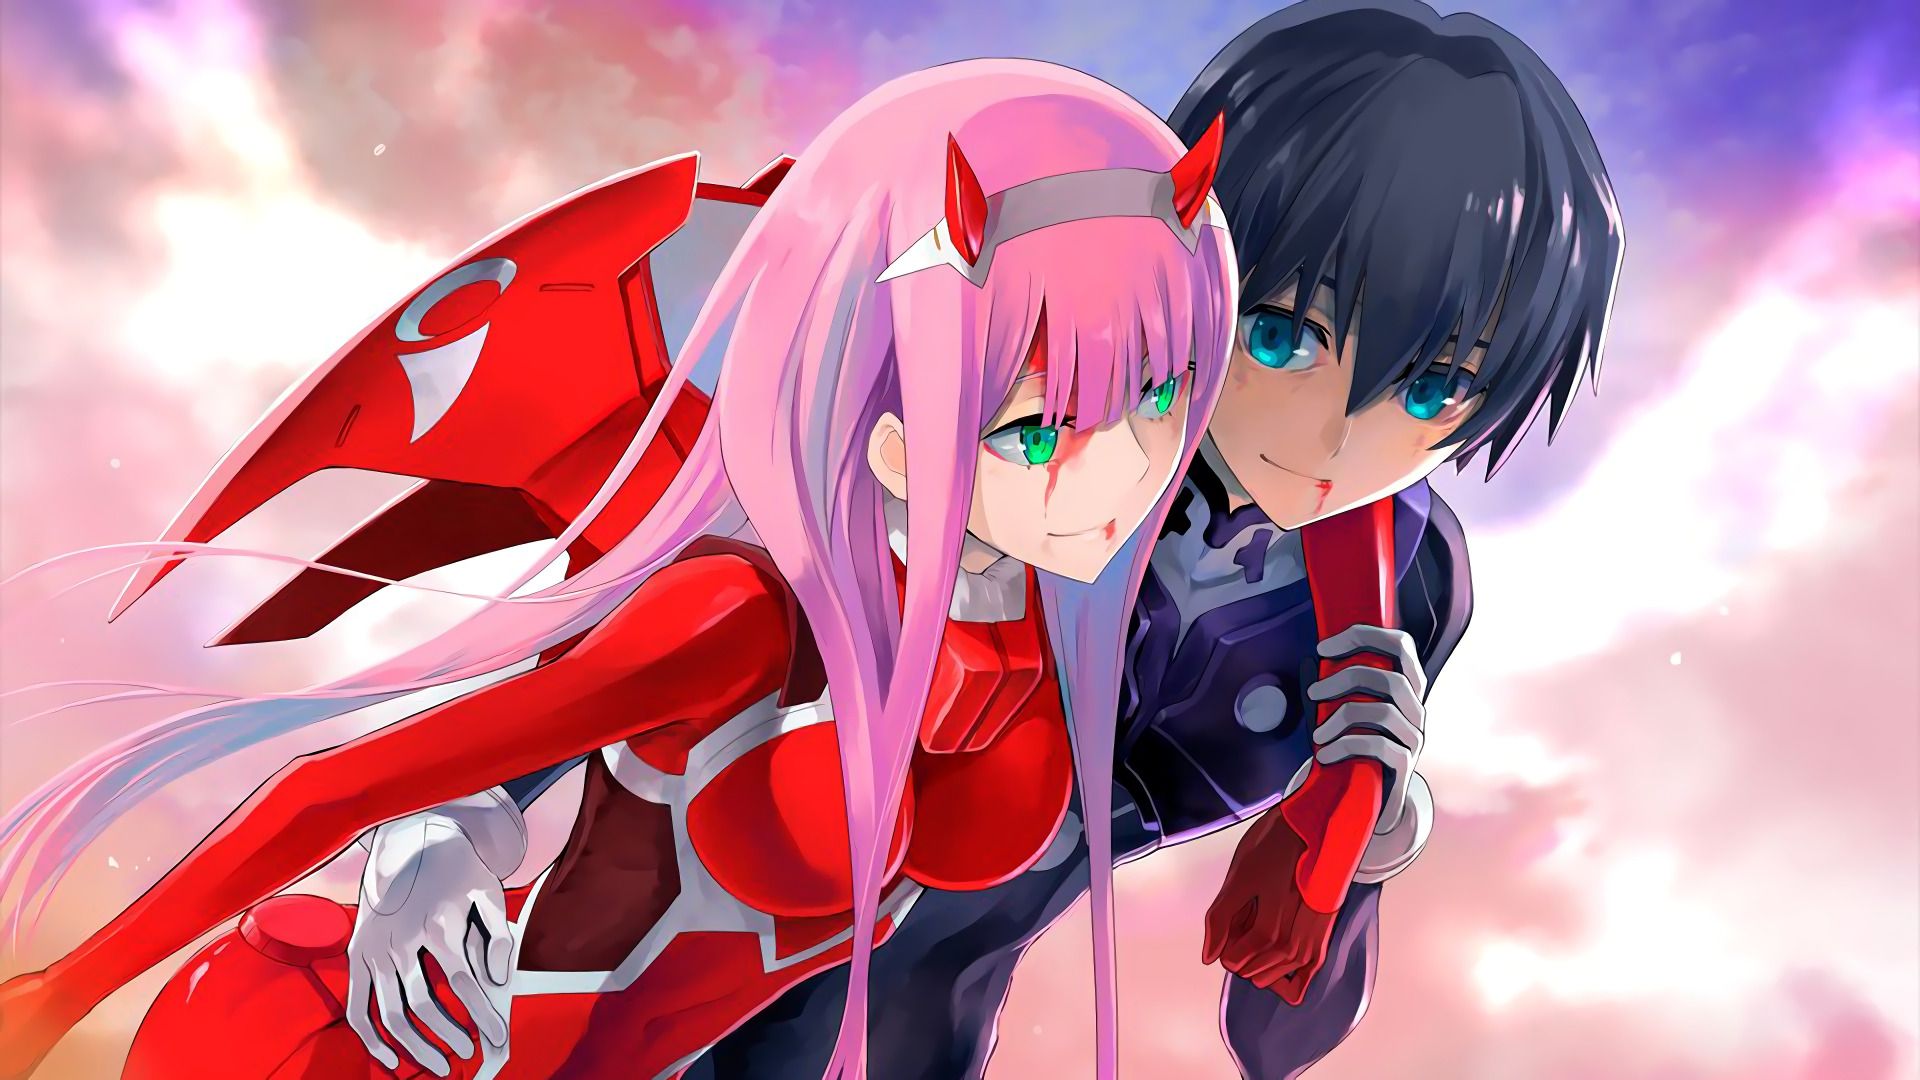 Anime Zero Two And Hiro Wallpapers - Wallpaper Cave